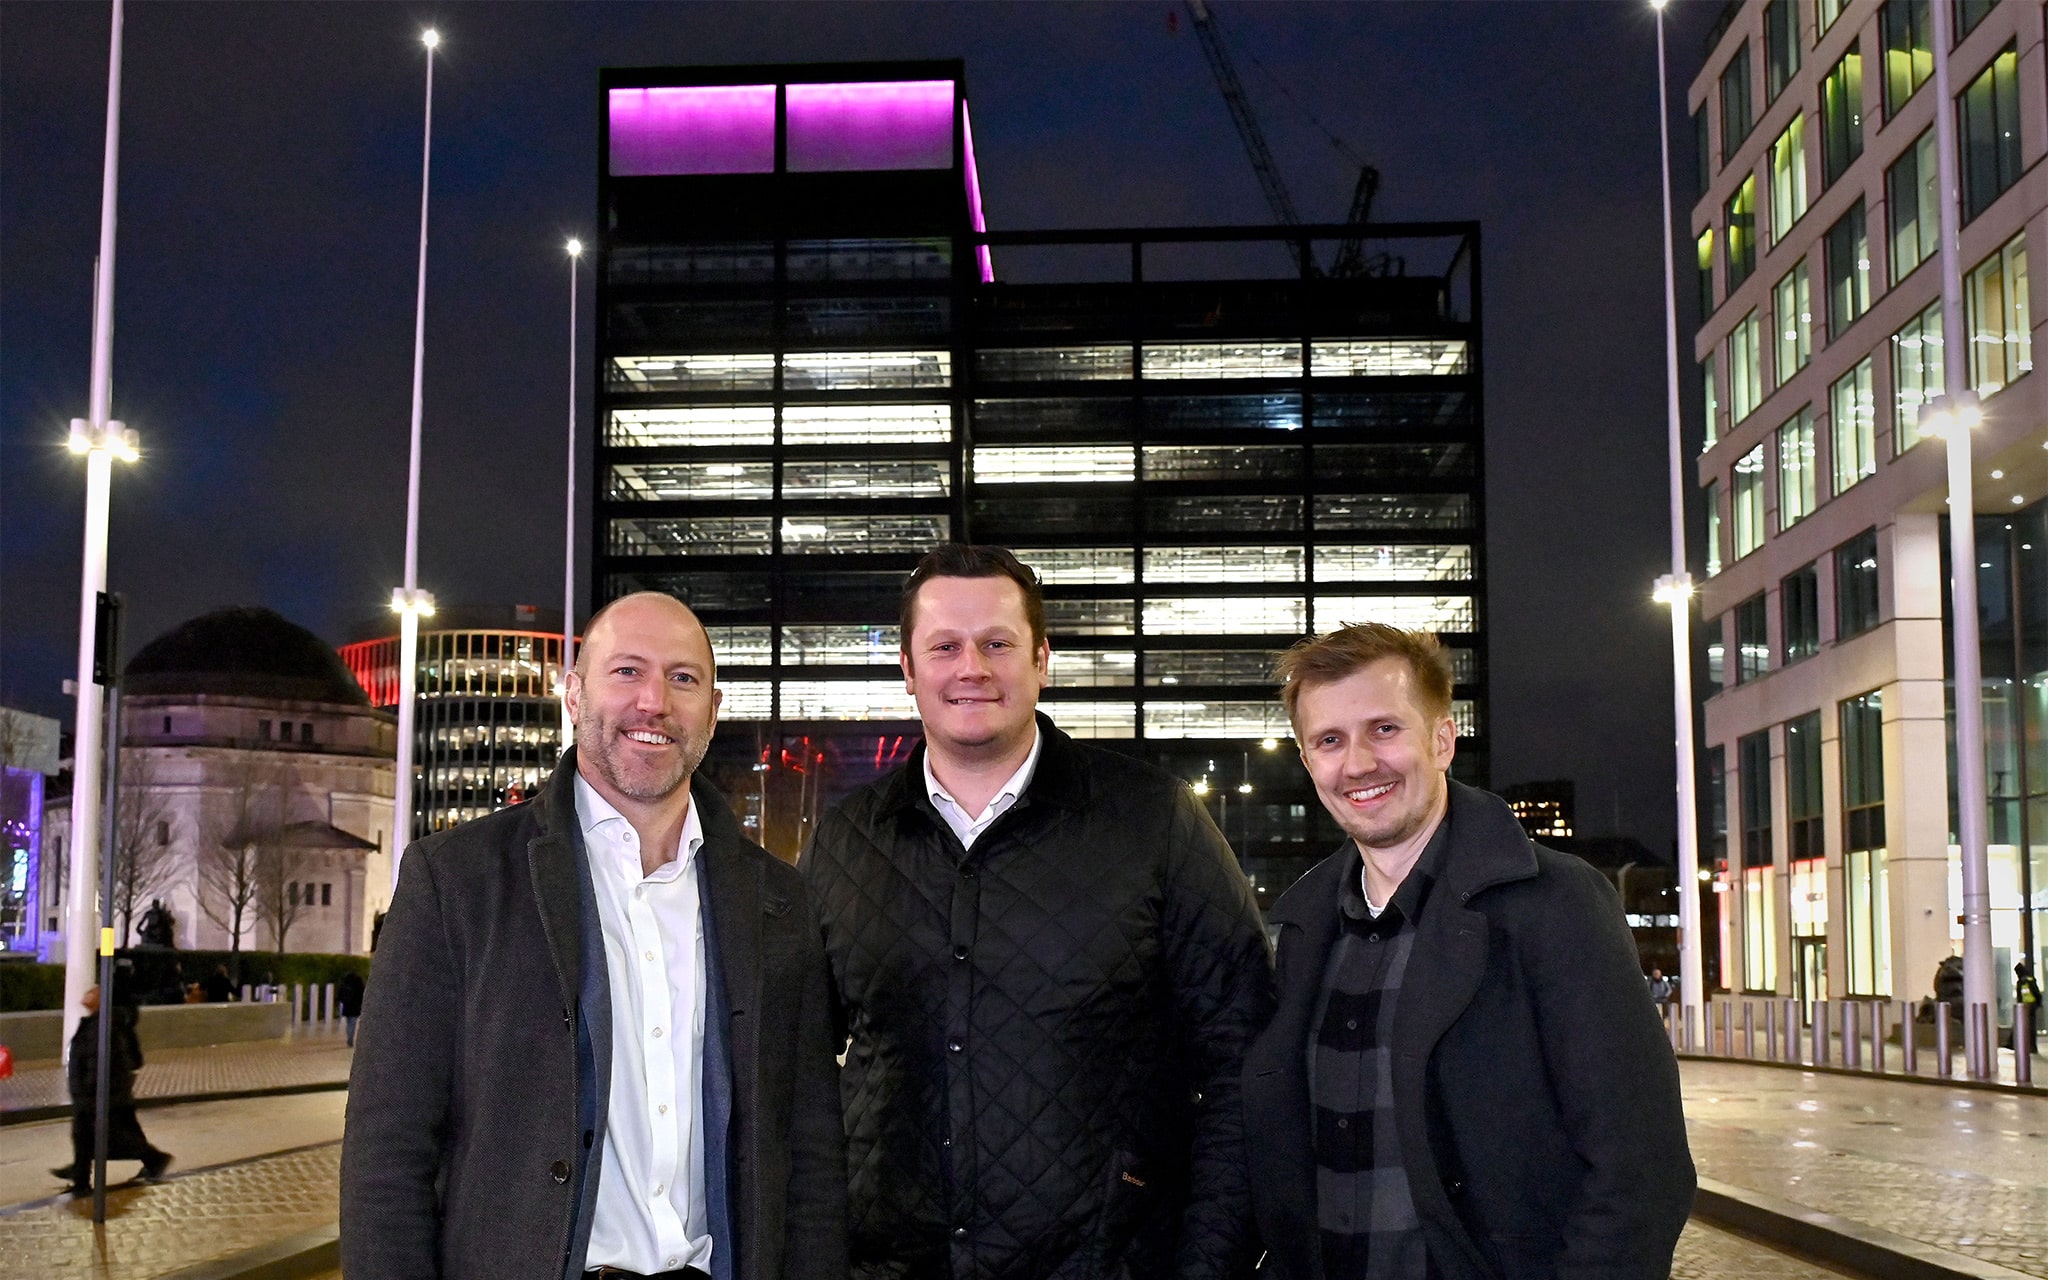 Developers responsible for the construction of One Centenary Way, Paradise Birmingham, standing on Broad Street with the building behind them.